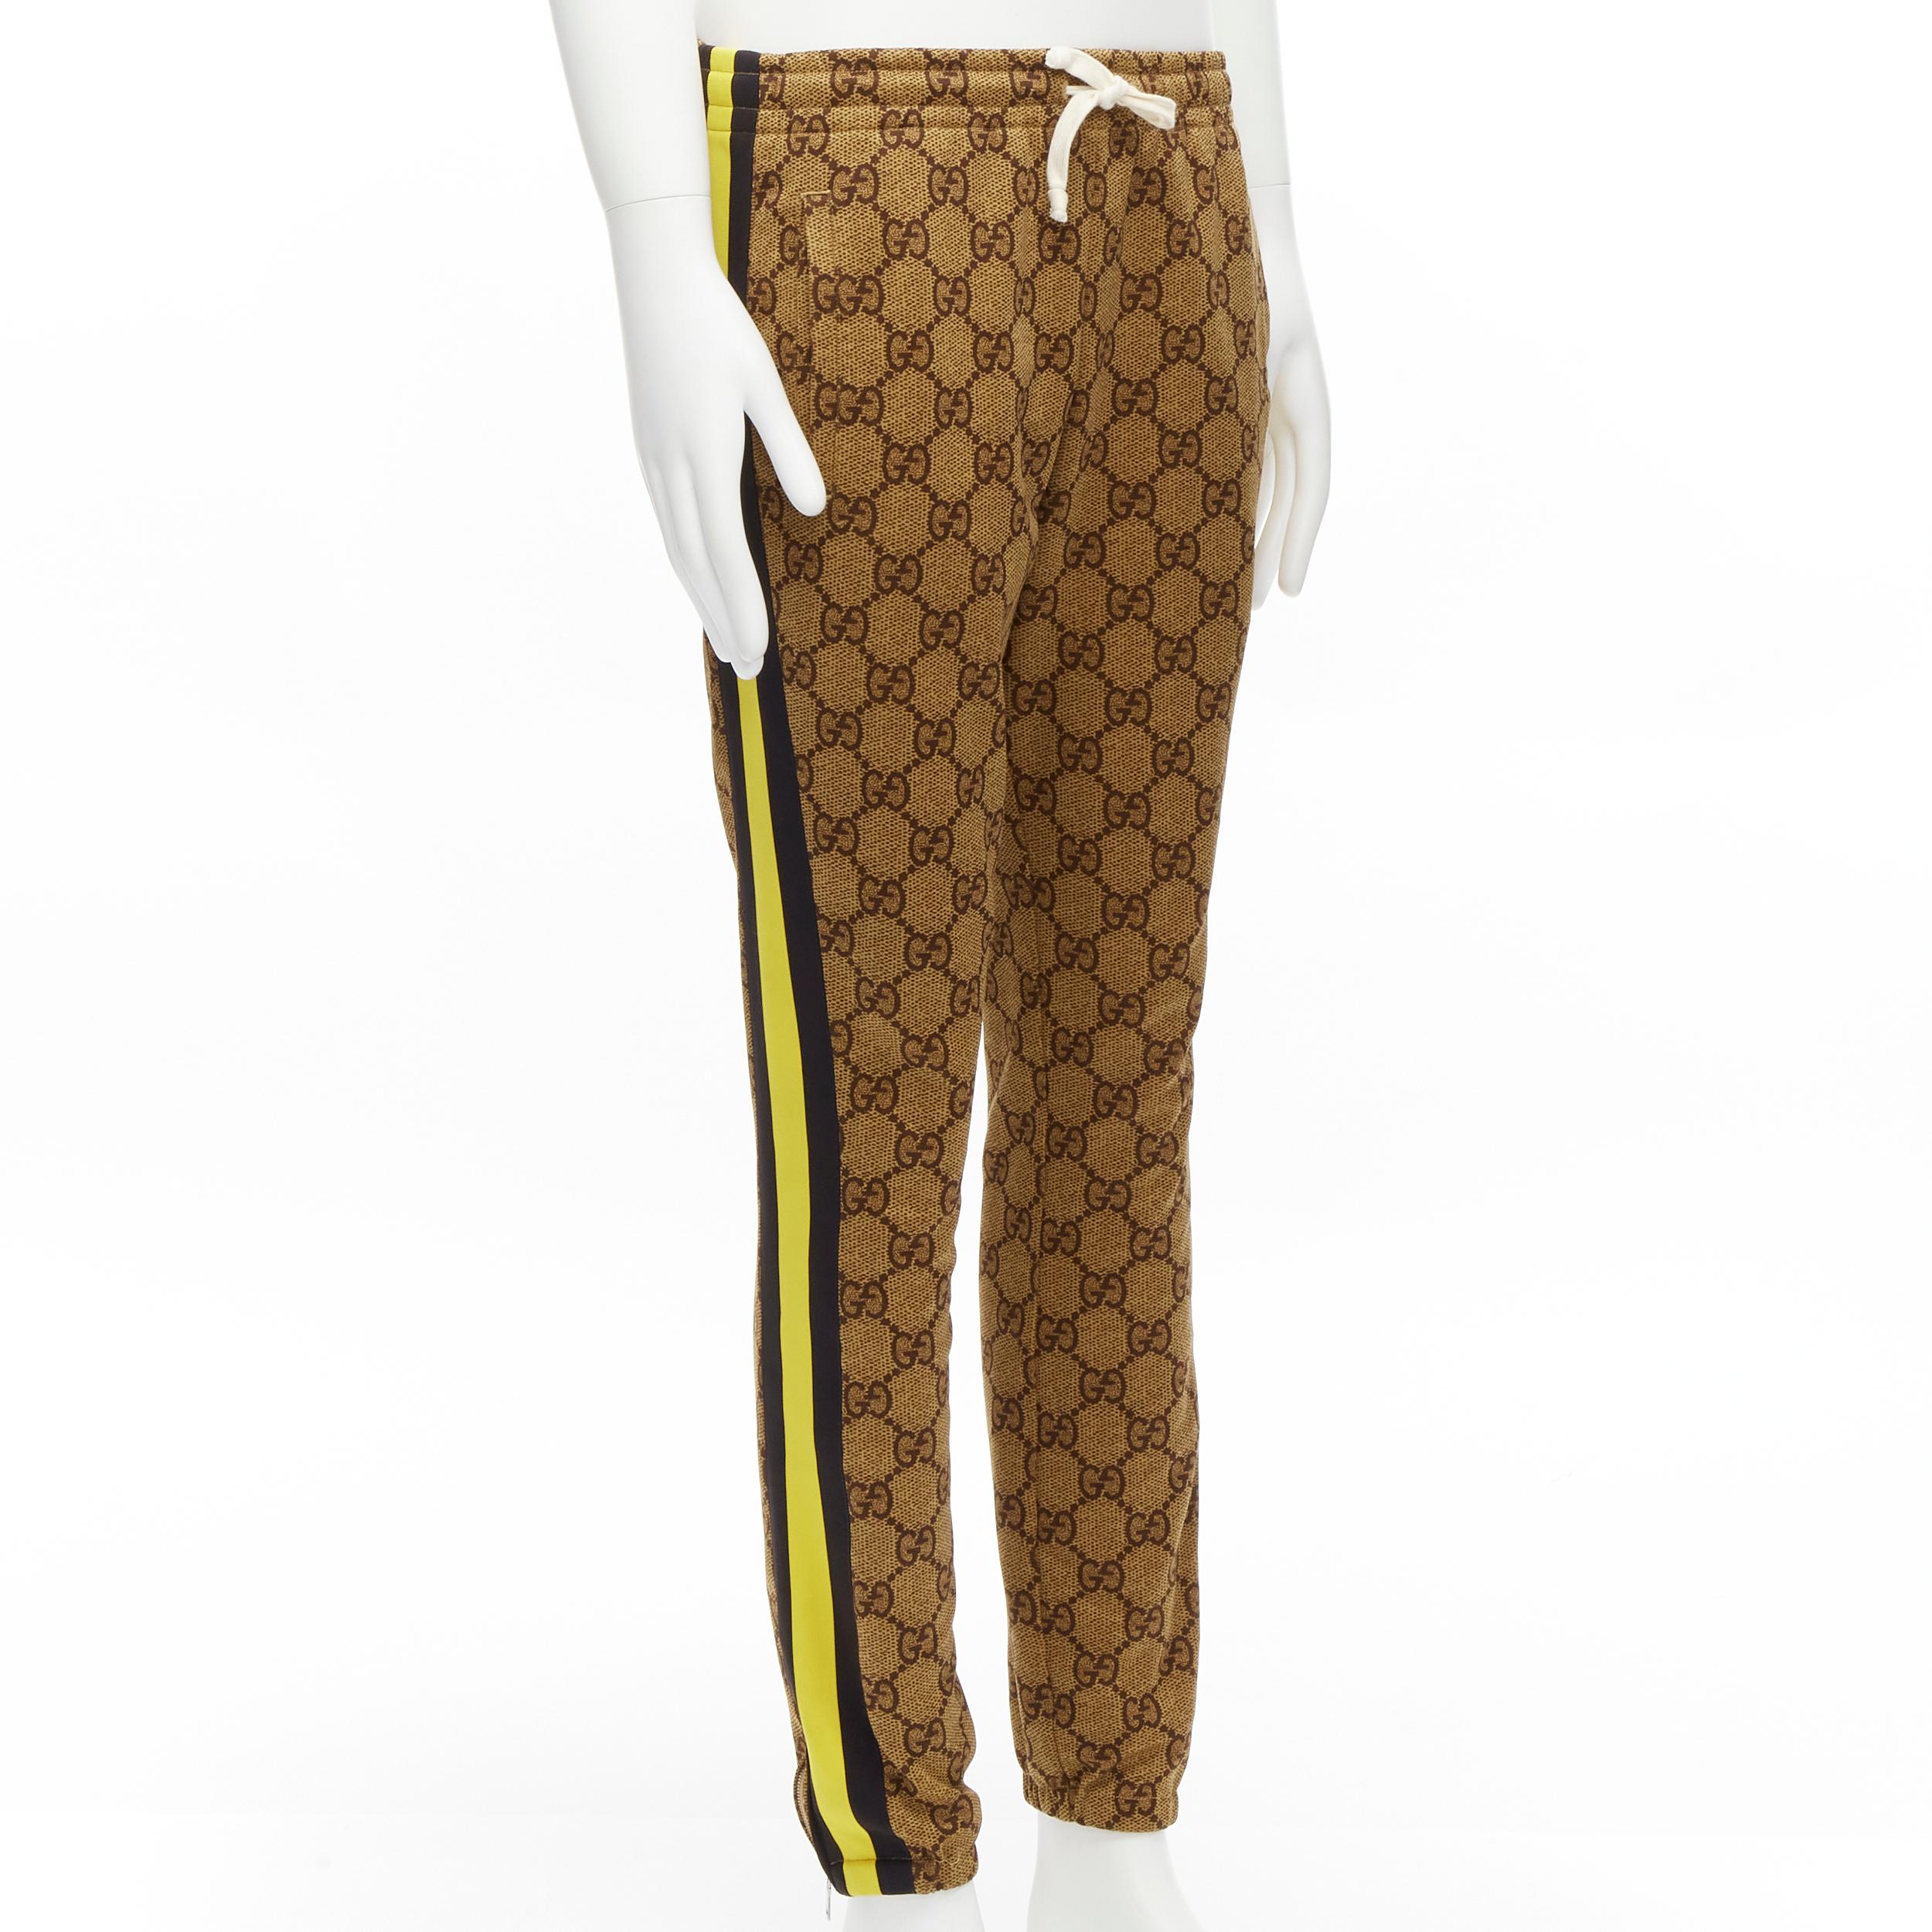 GUCCI Michele 2019 brown GG monogram yellow web trim track pants joggers S
Reference: TGAS/D00089
Brand: Gucci
Designer: Alessandro Michele
Collection: 2019
Material: Polyester, Cotton
Color: Brown, Yellow
Pattern: Monogram
Closure: Drawstring
Extra